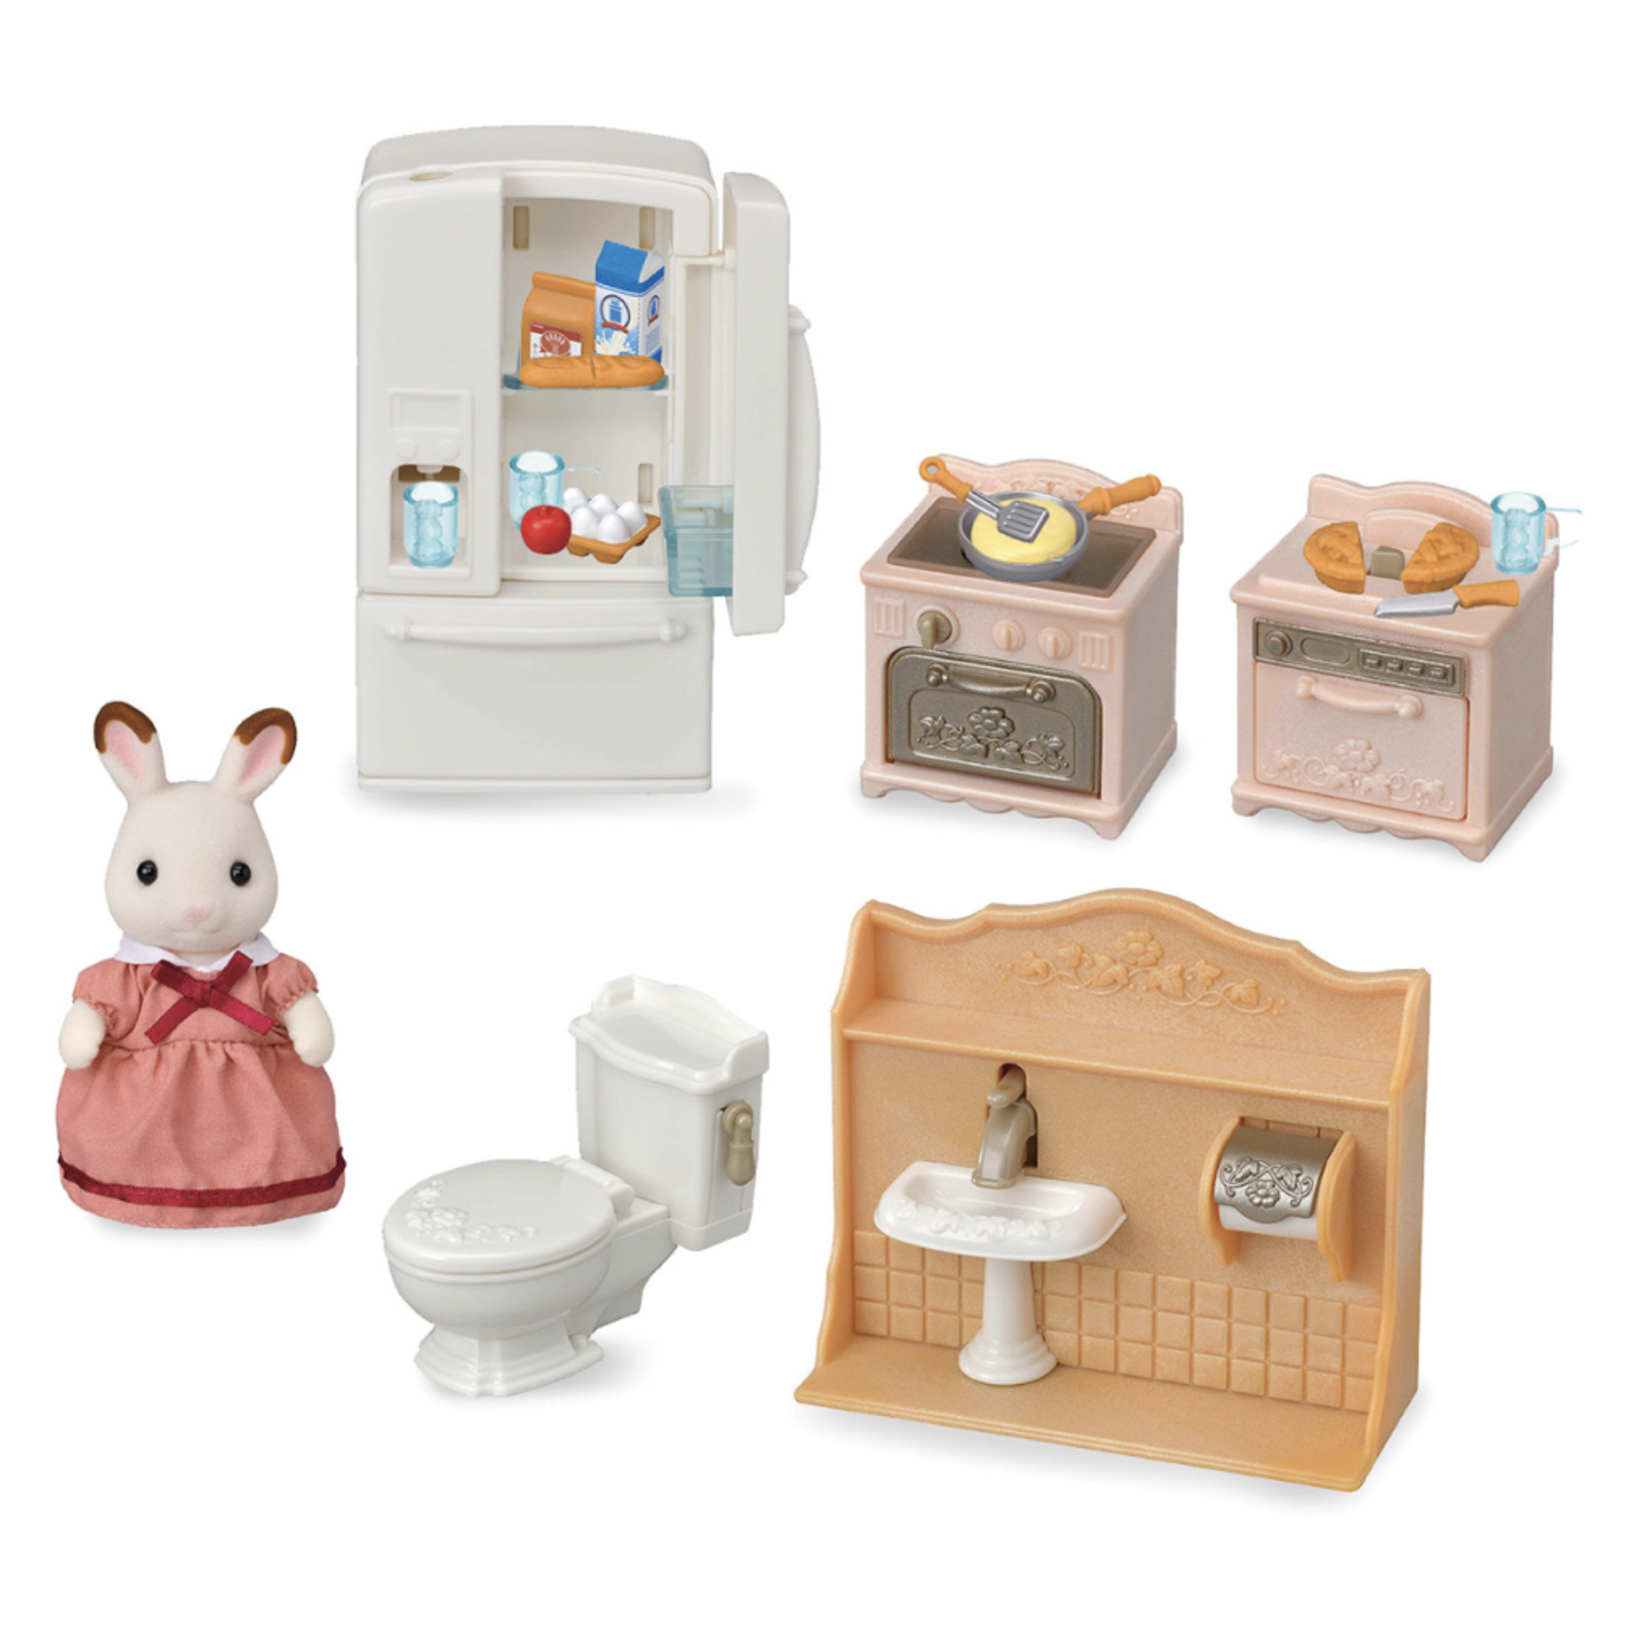 Calico Critters Calico Critters-Playful Starter Furniture Set